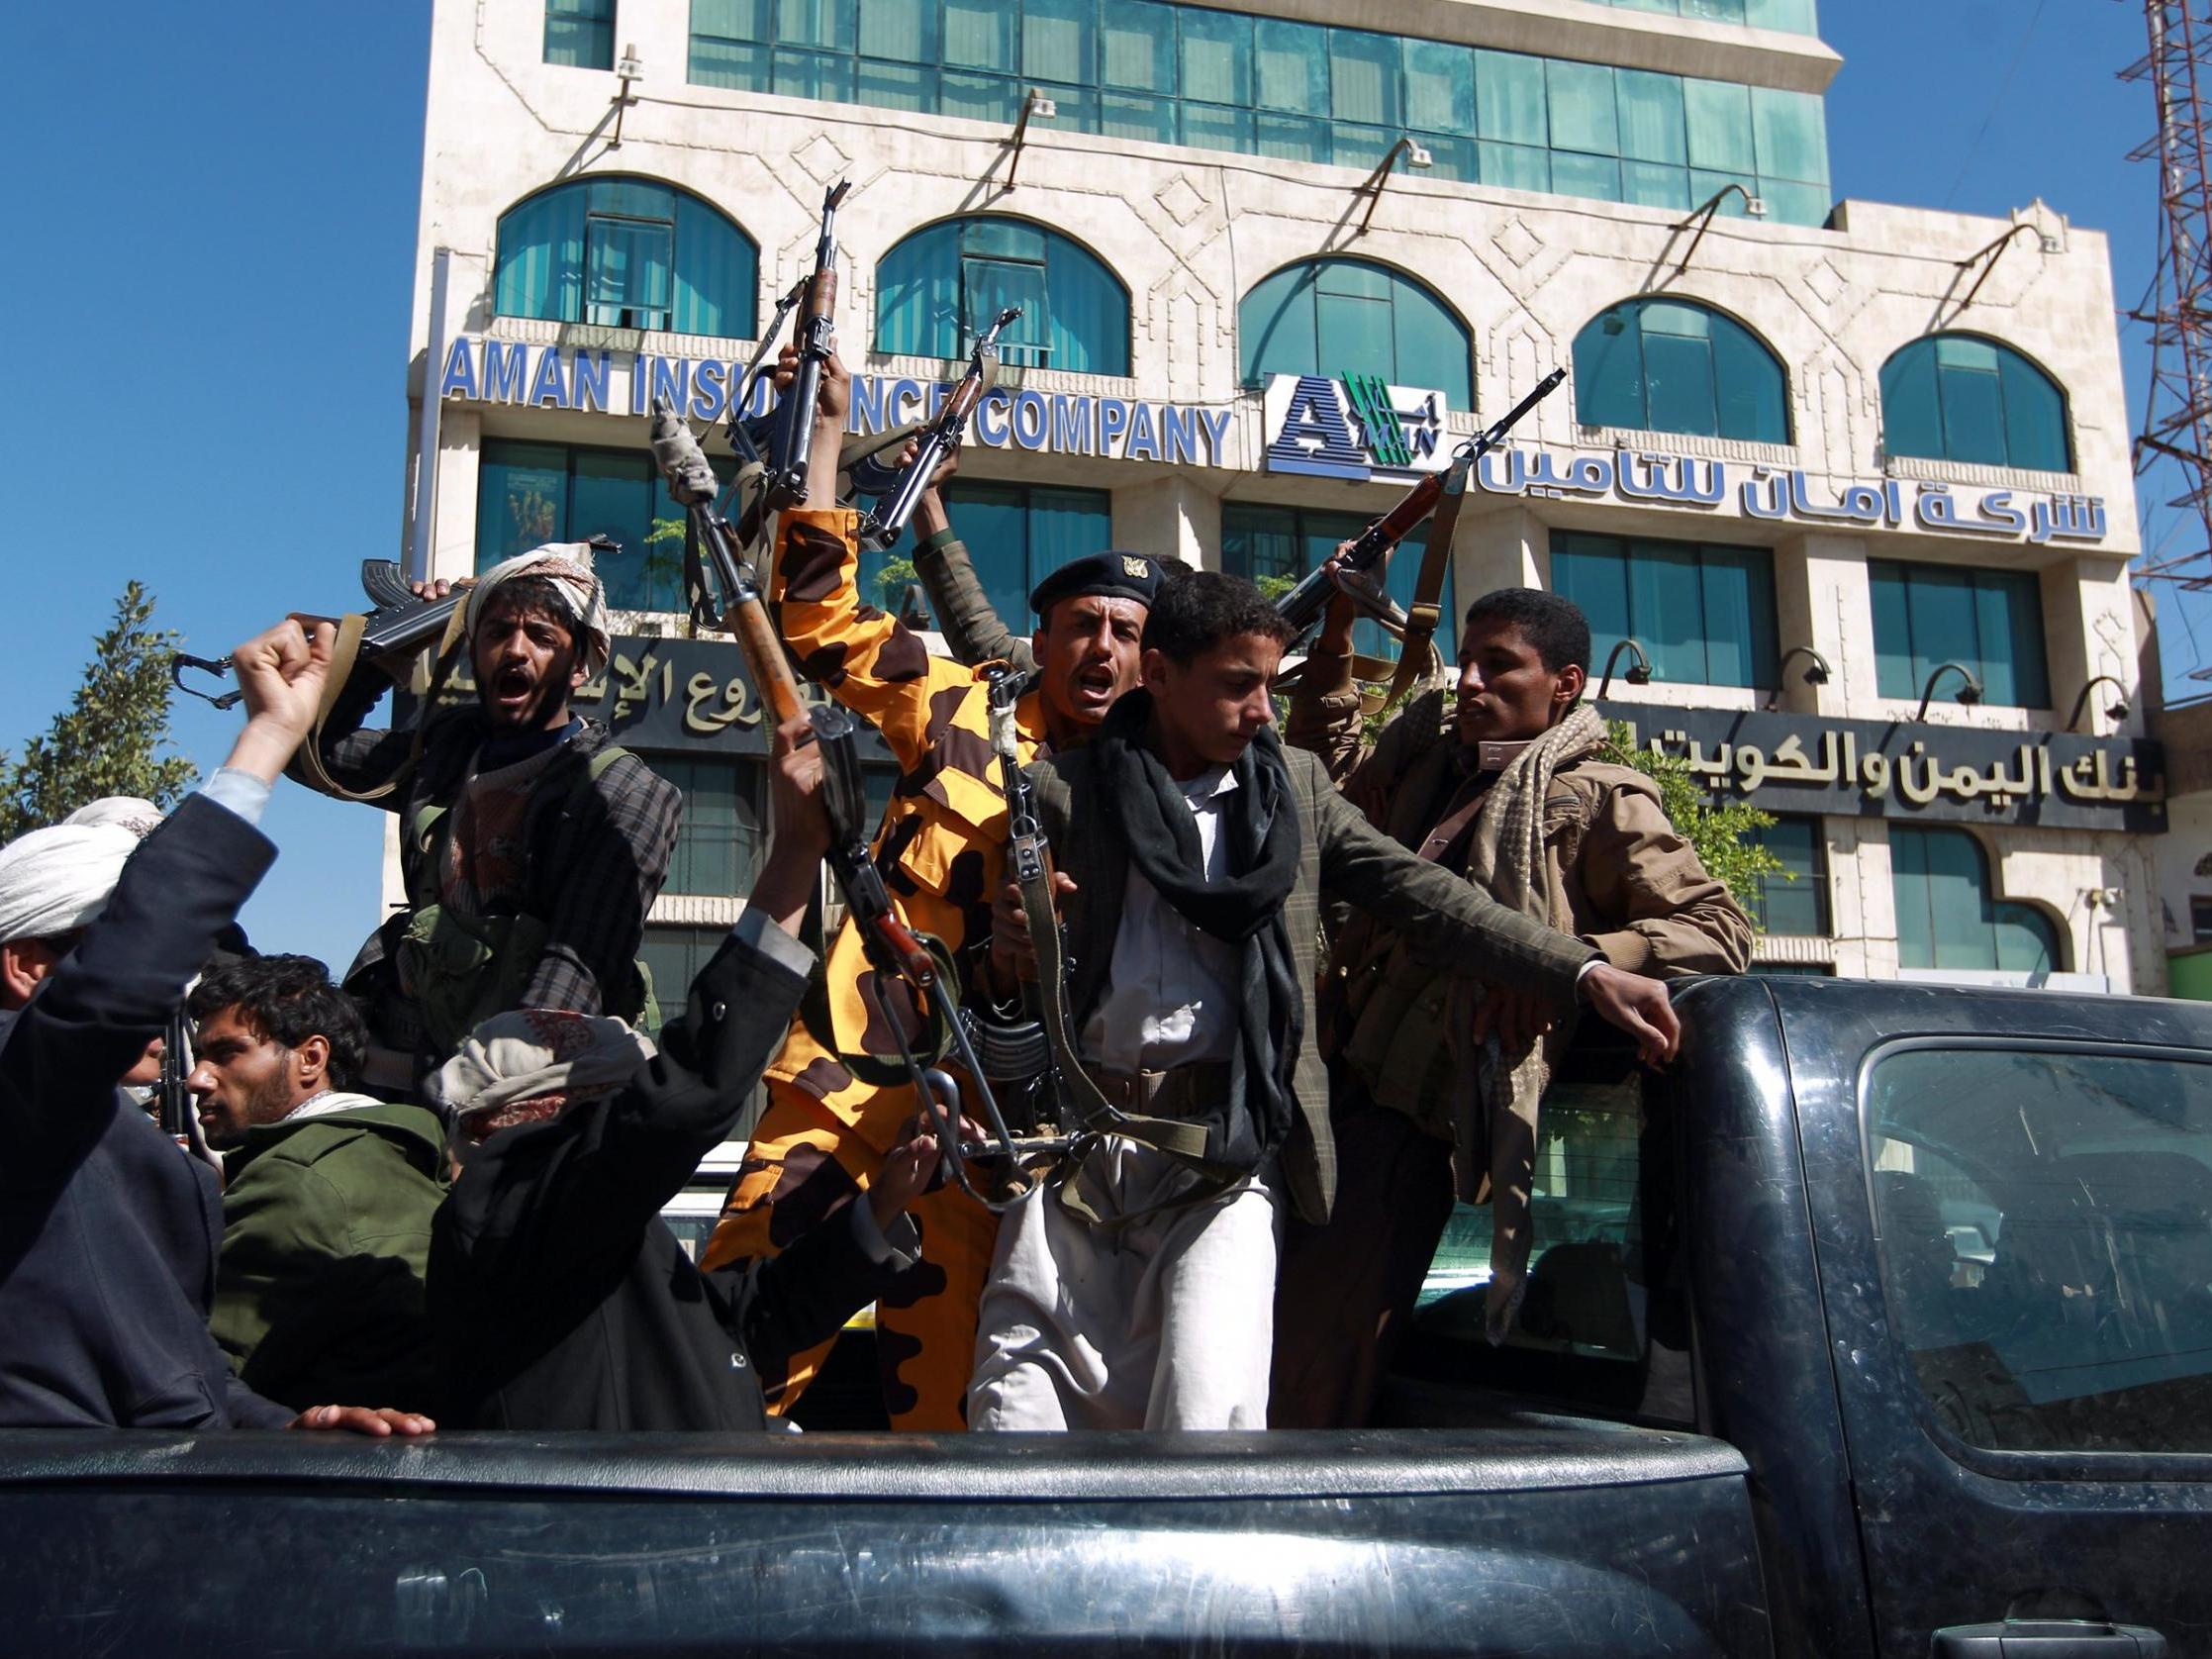 Yemen's Houthi rebels are backed by Iran as they fight forces supported by Saudi Arabia.